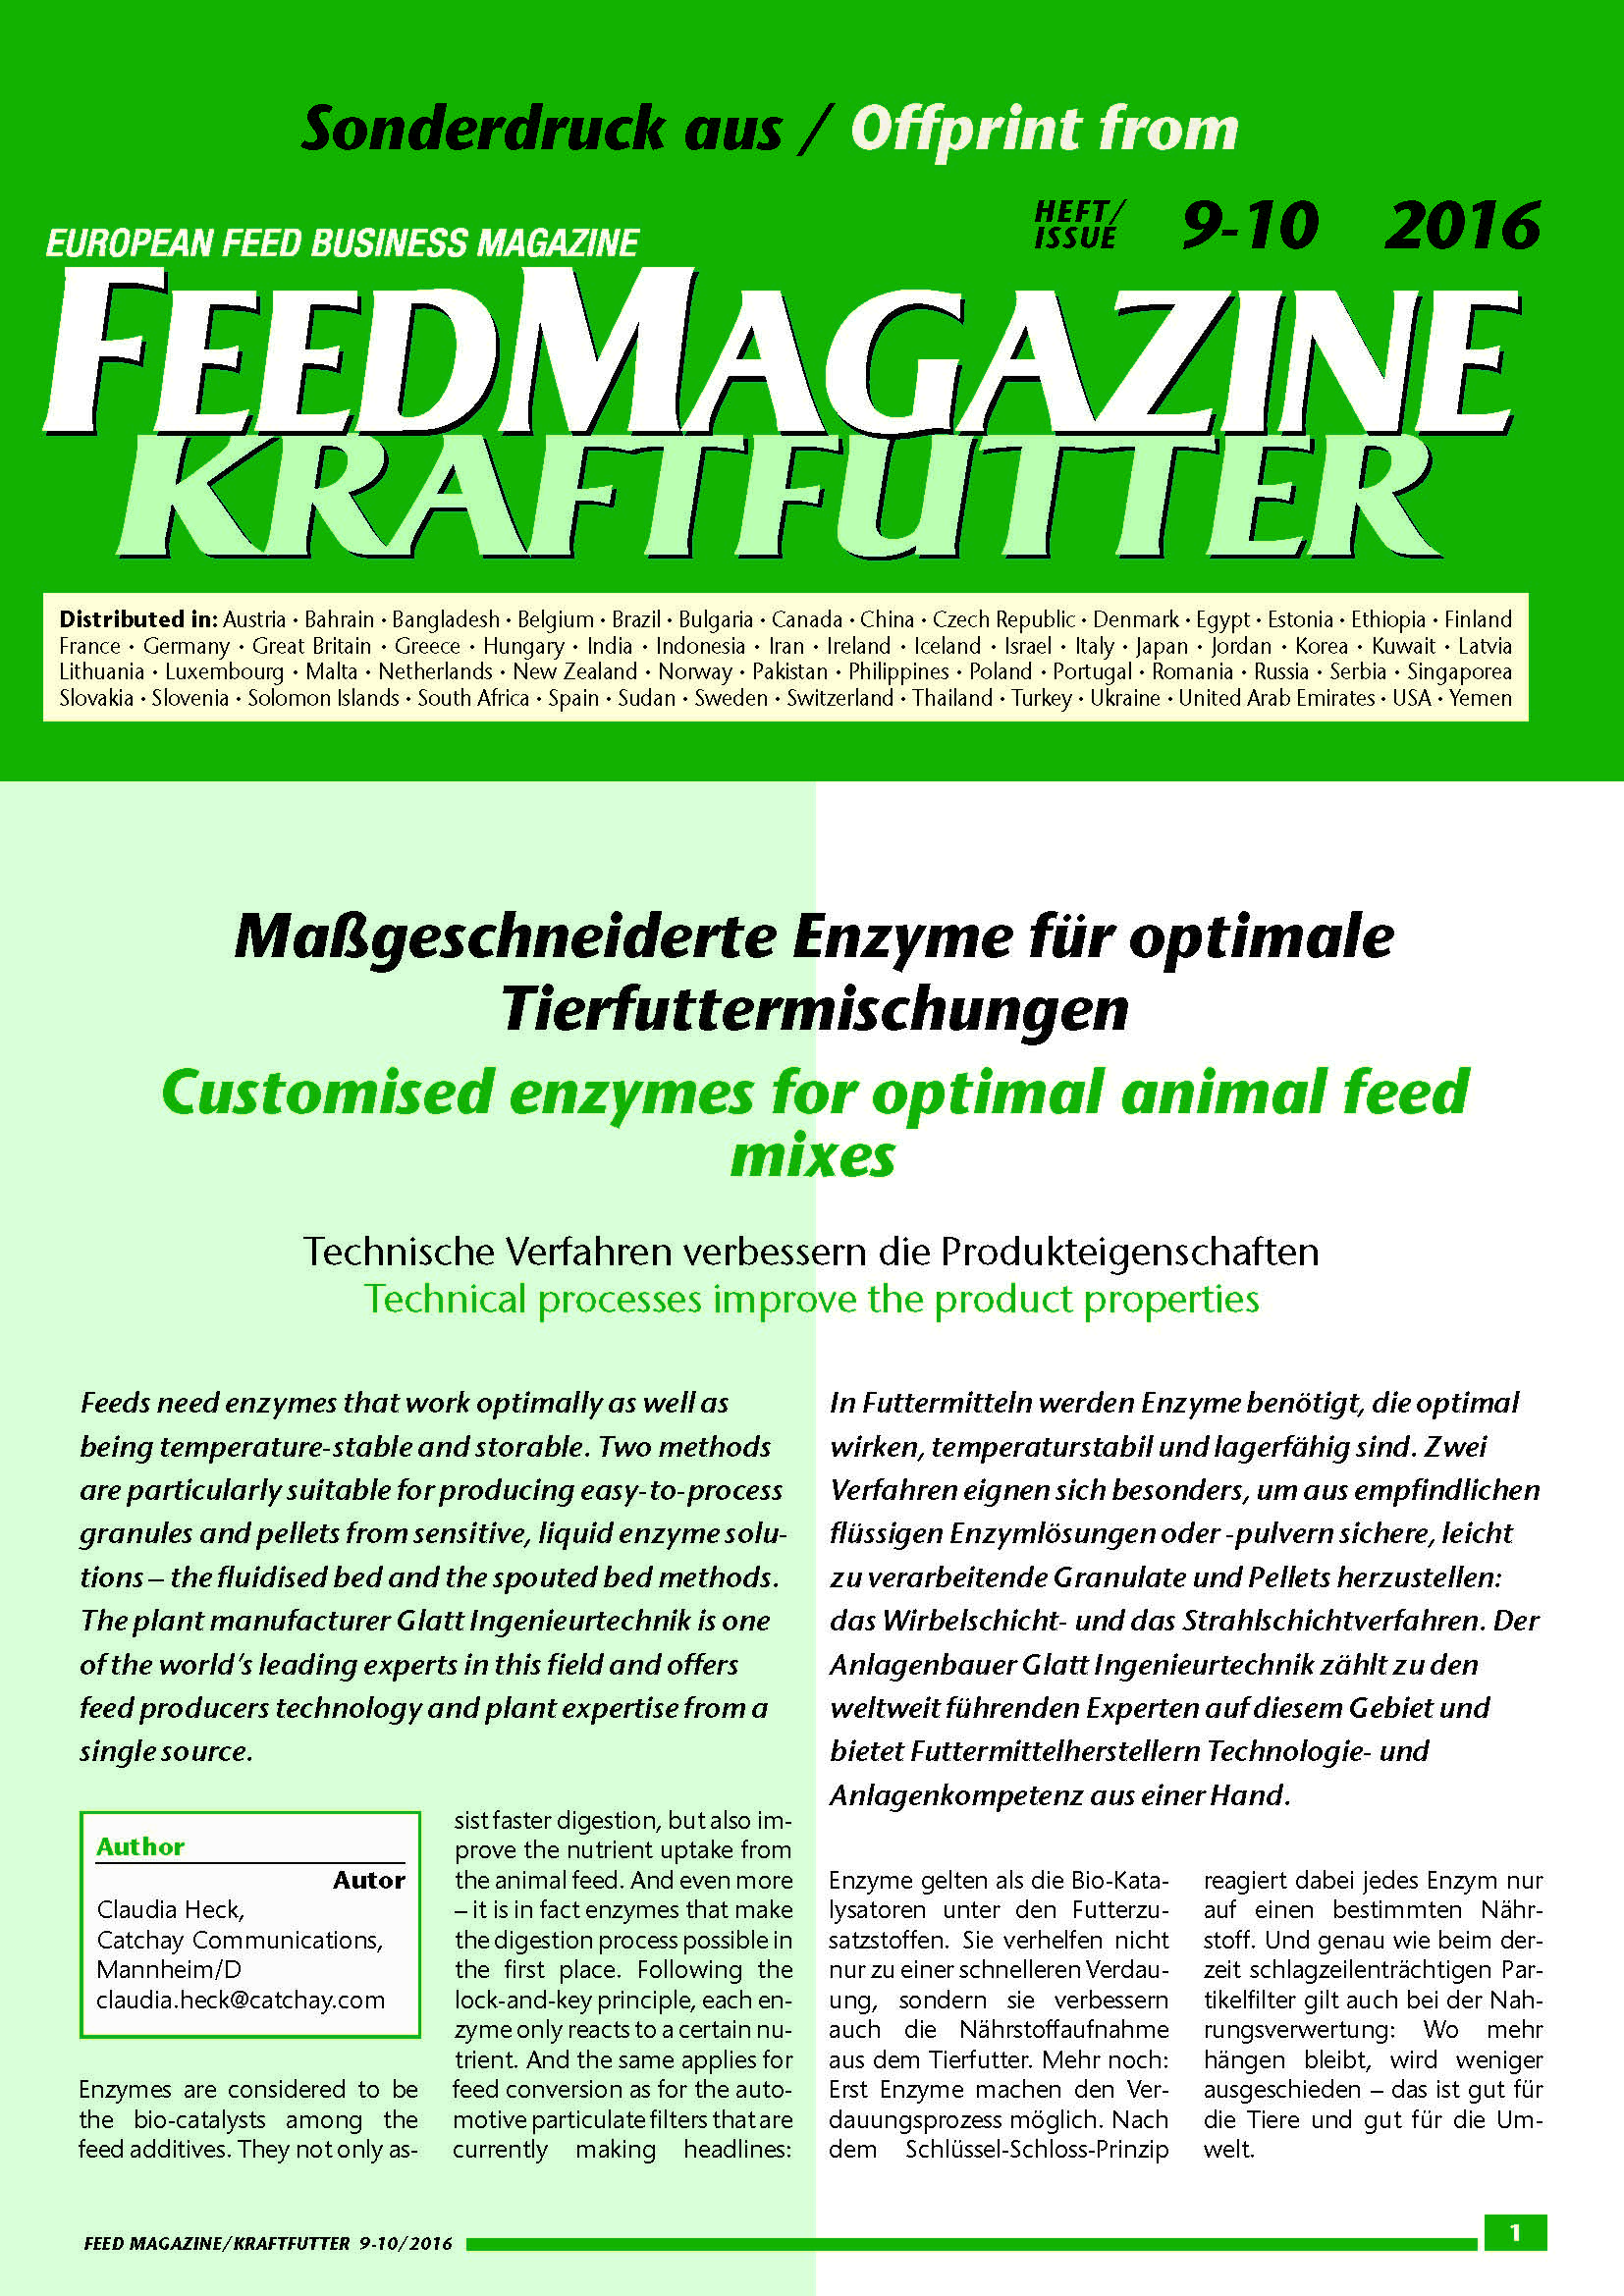 Customised enzyms for optimal animal feed mixes